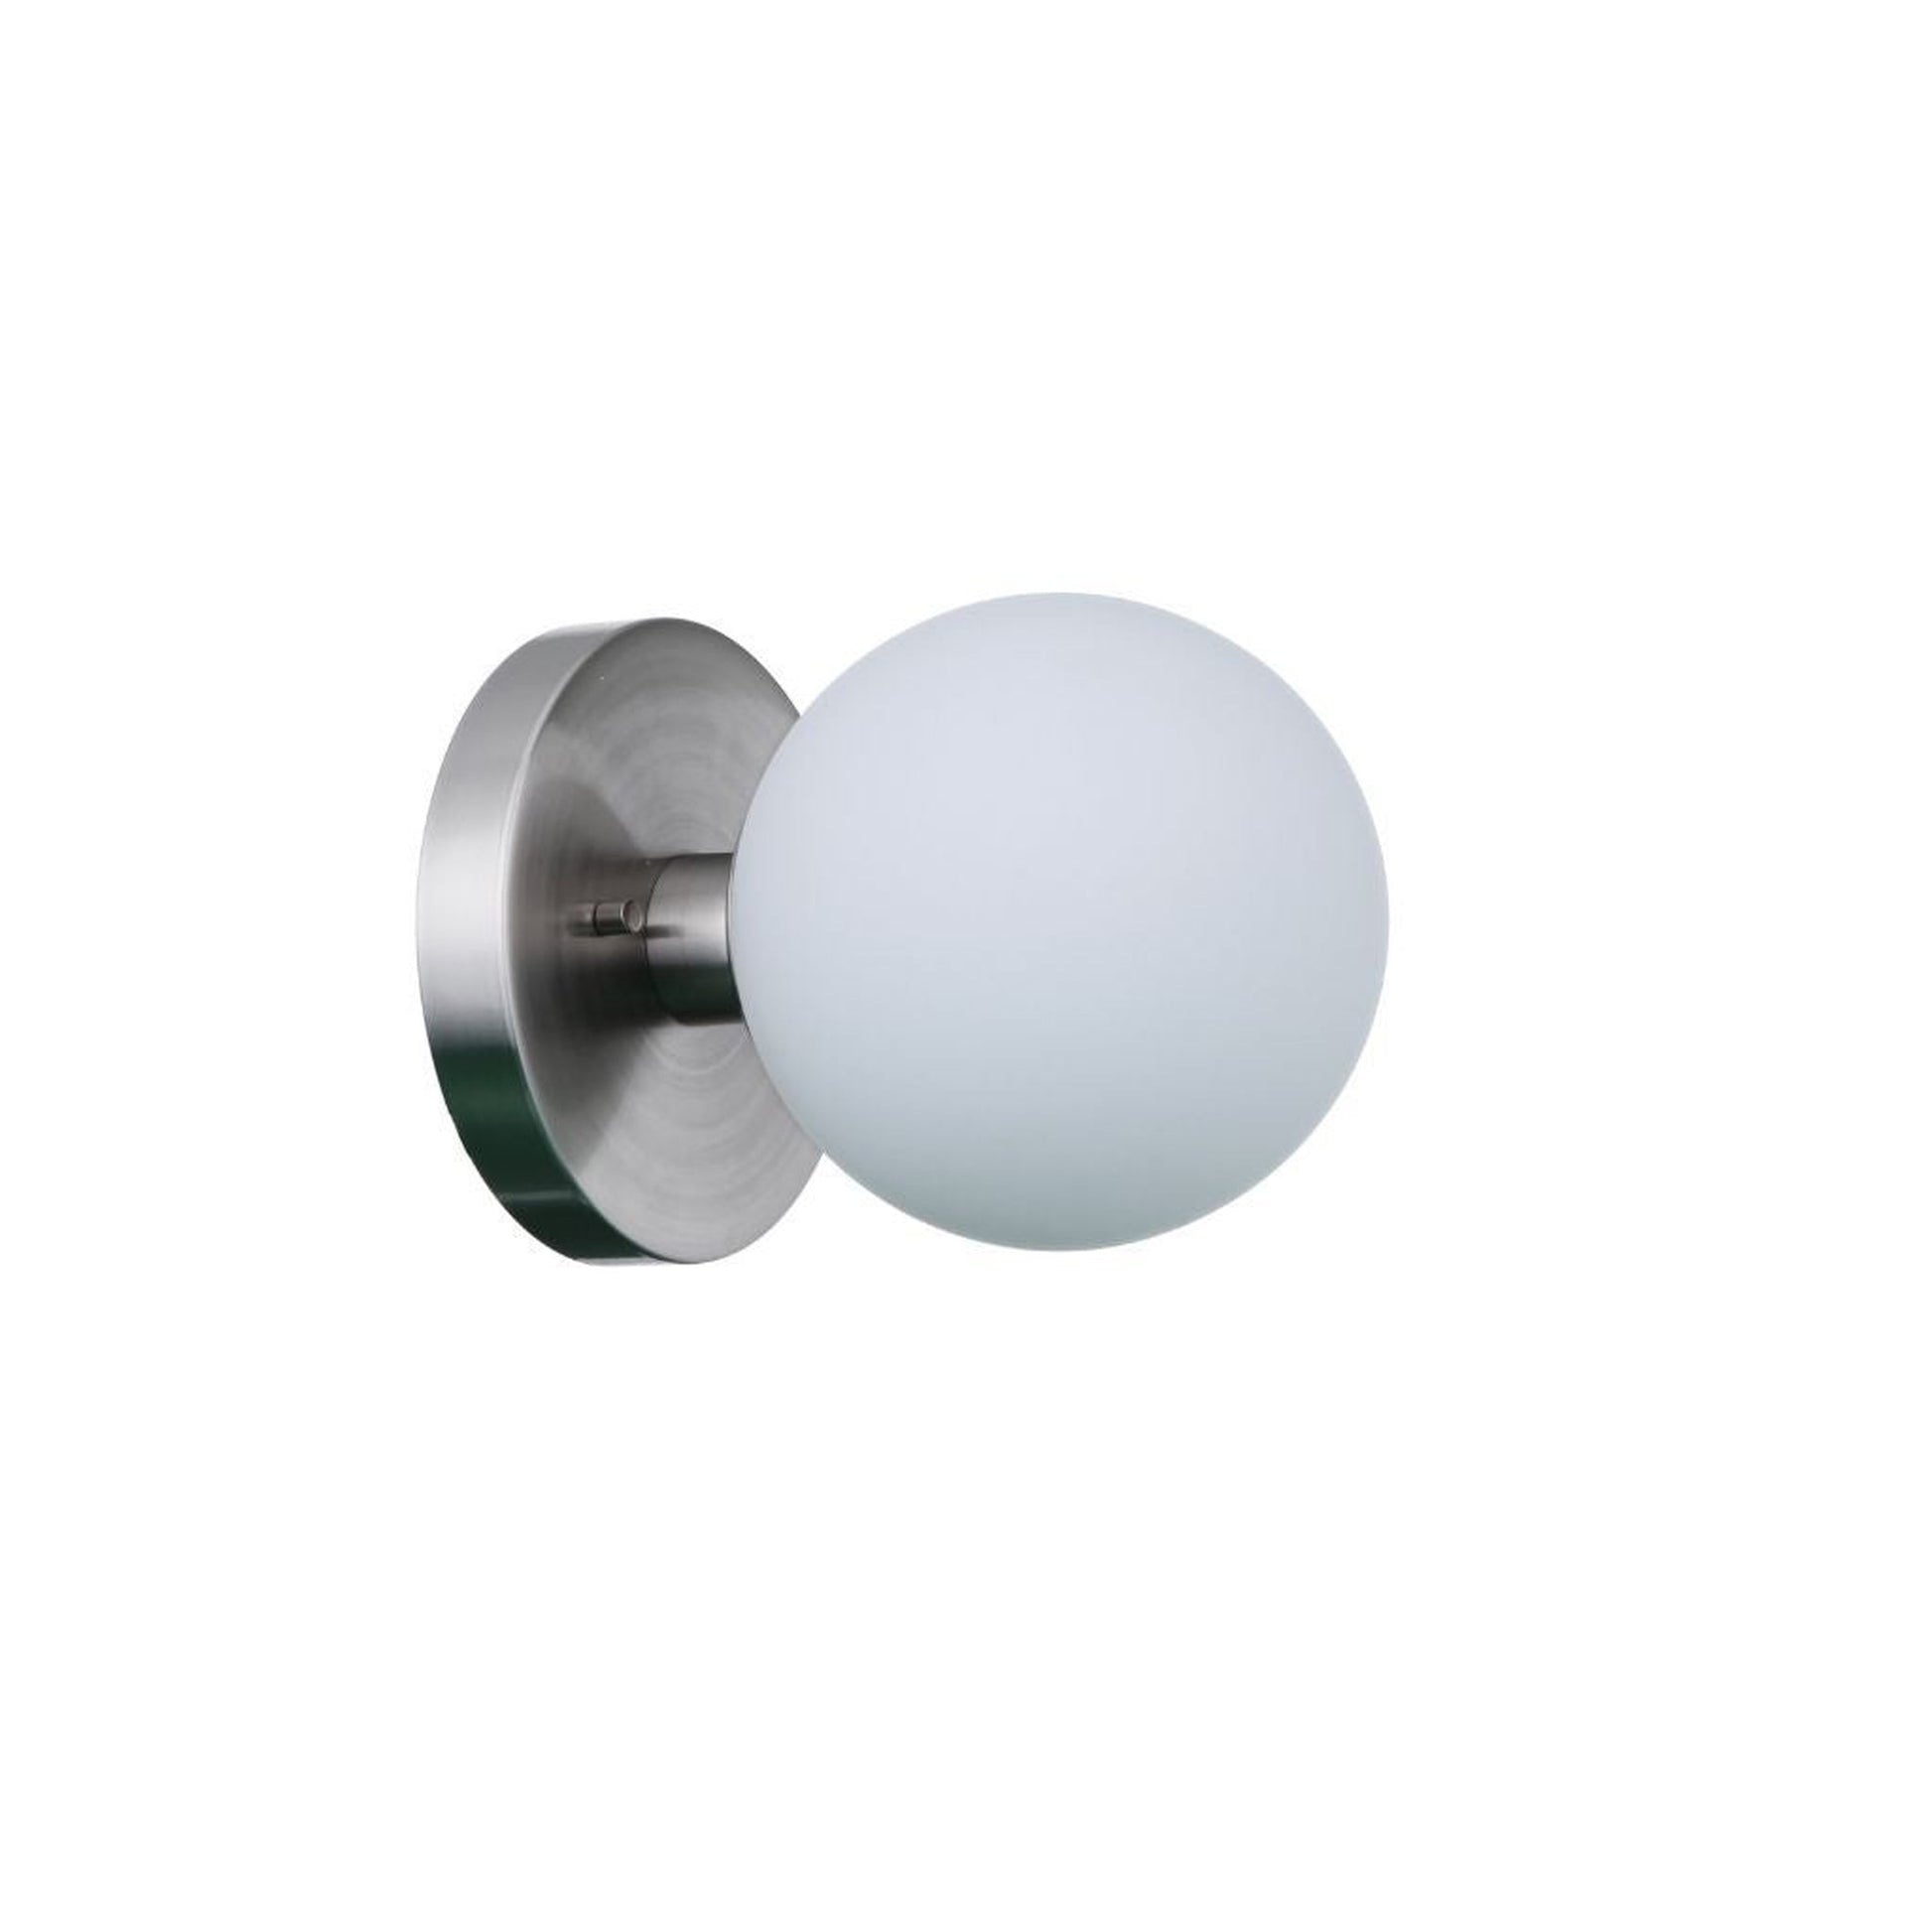 Craftmade Dotti 6" x 7" 1-Light Brushed Polished Nickel Wall Sconce With White Opal Glass Shade